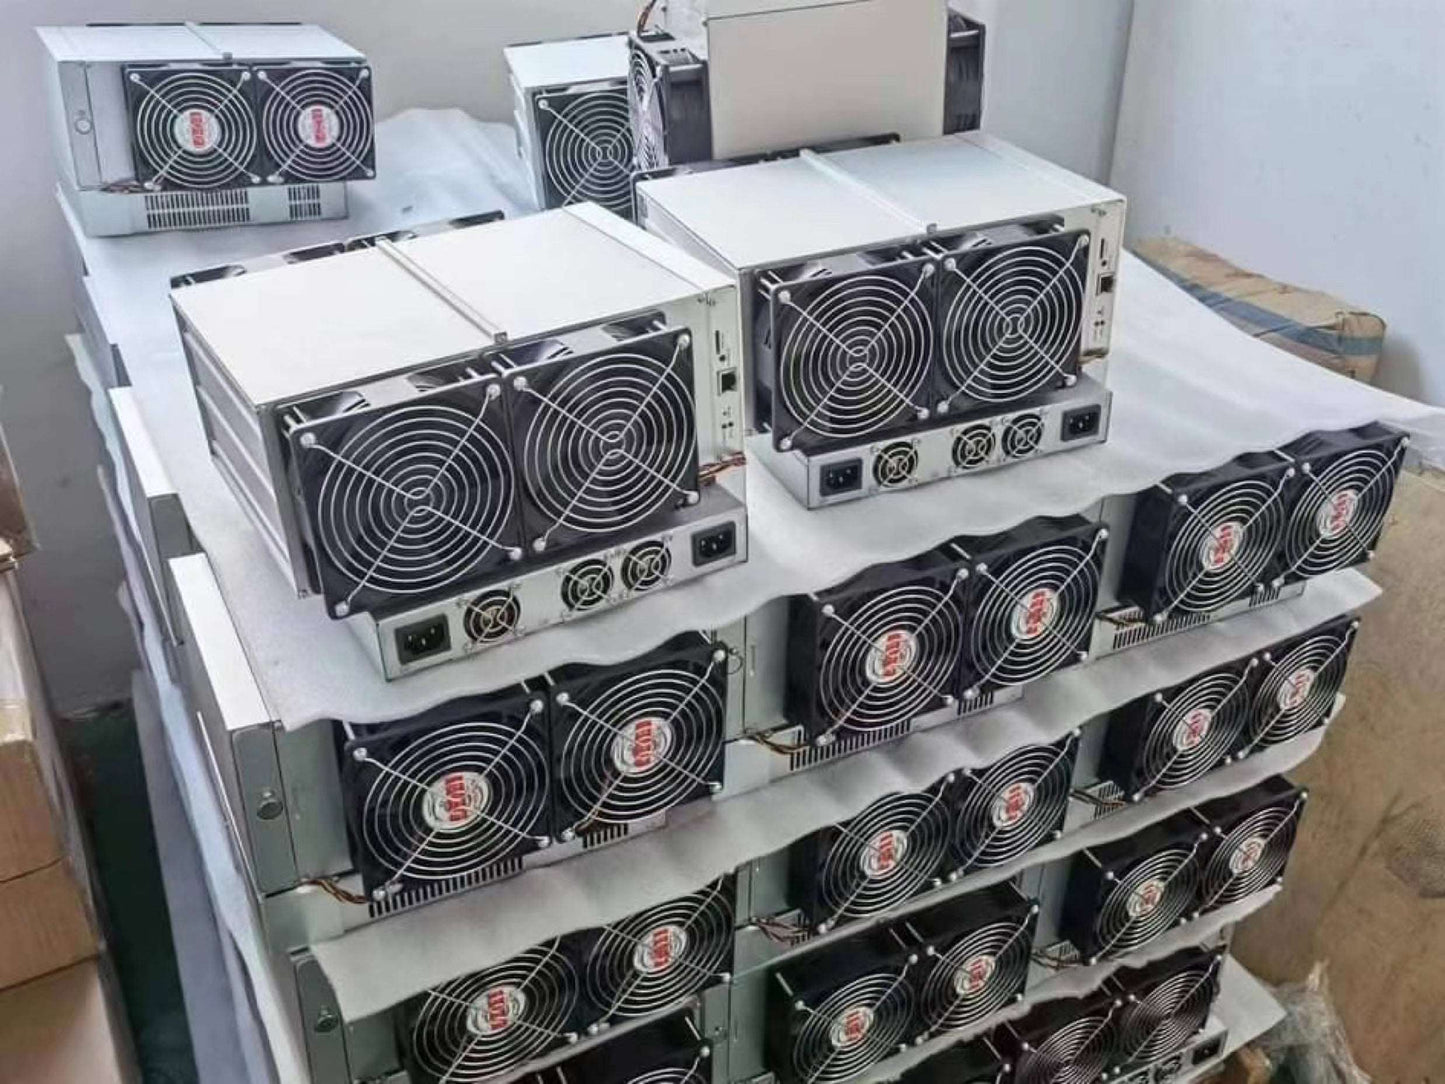 Oil and water cooling system for antminer s17+